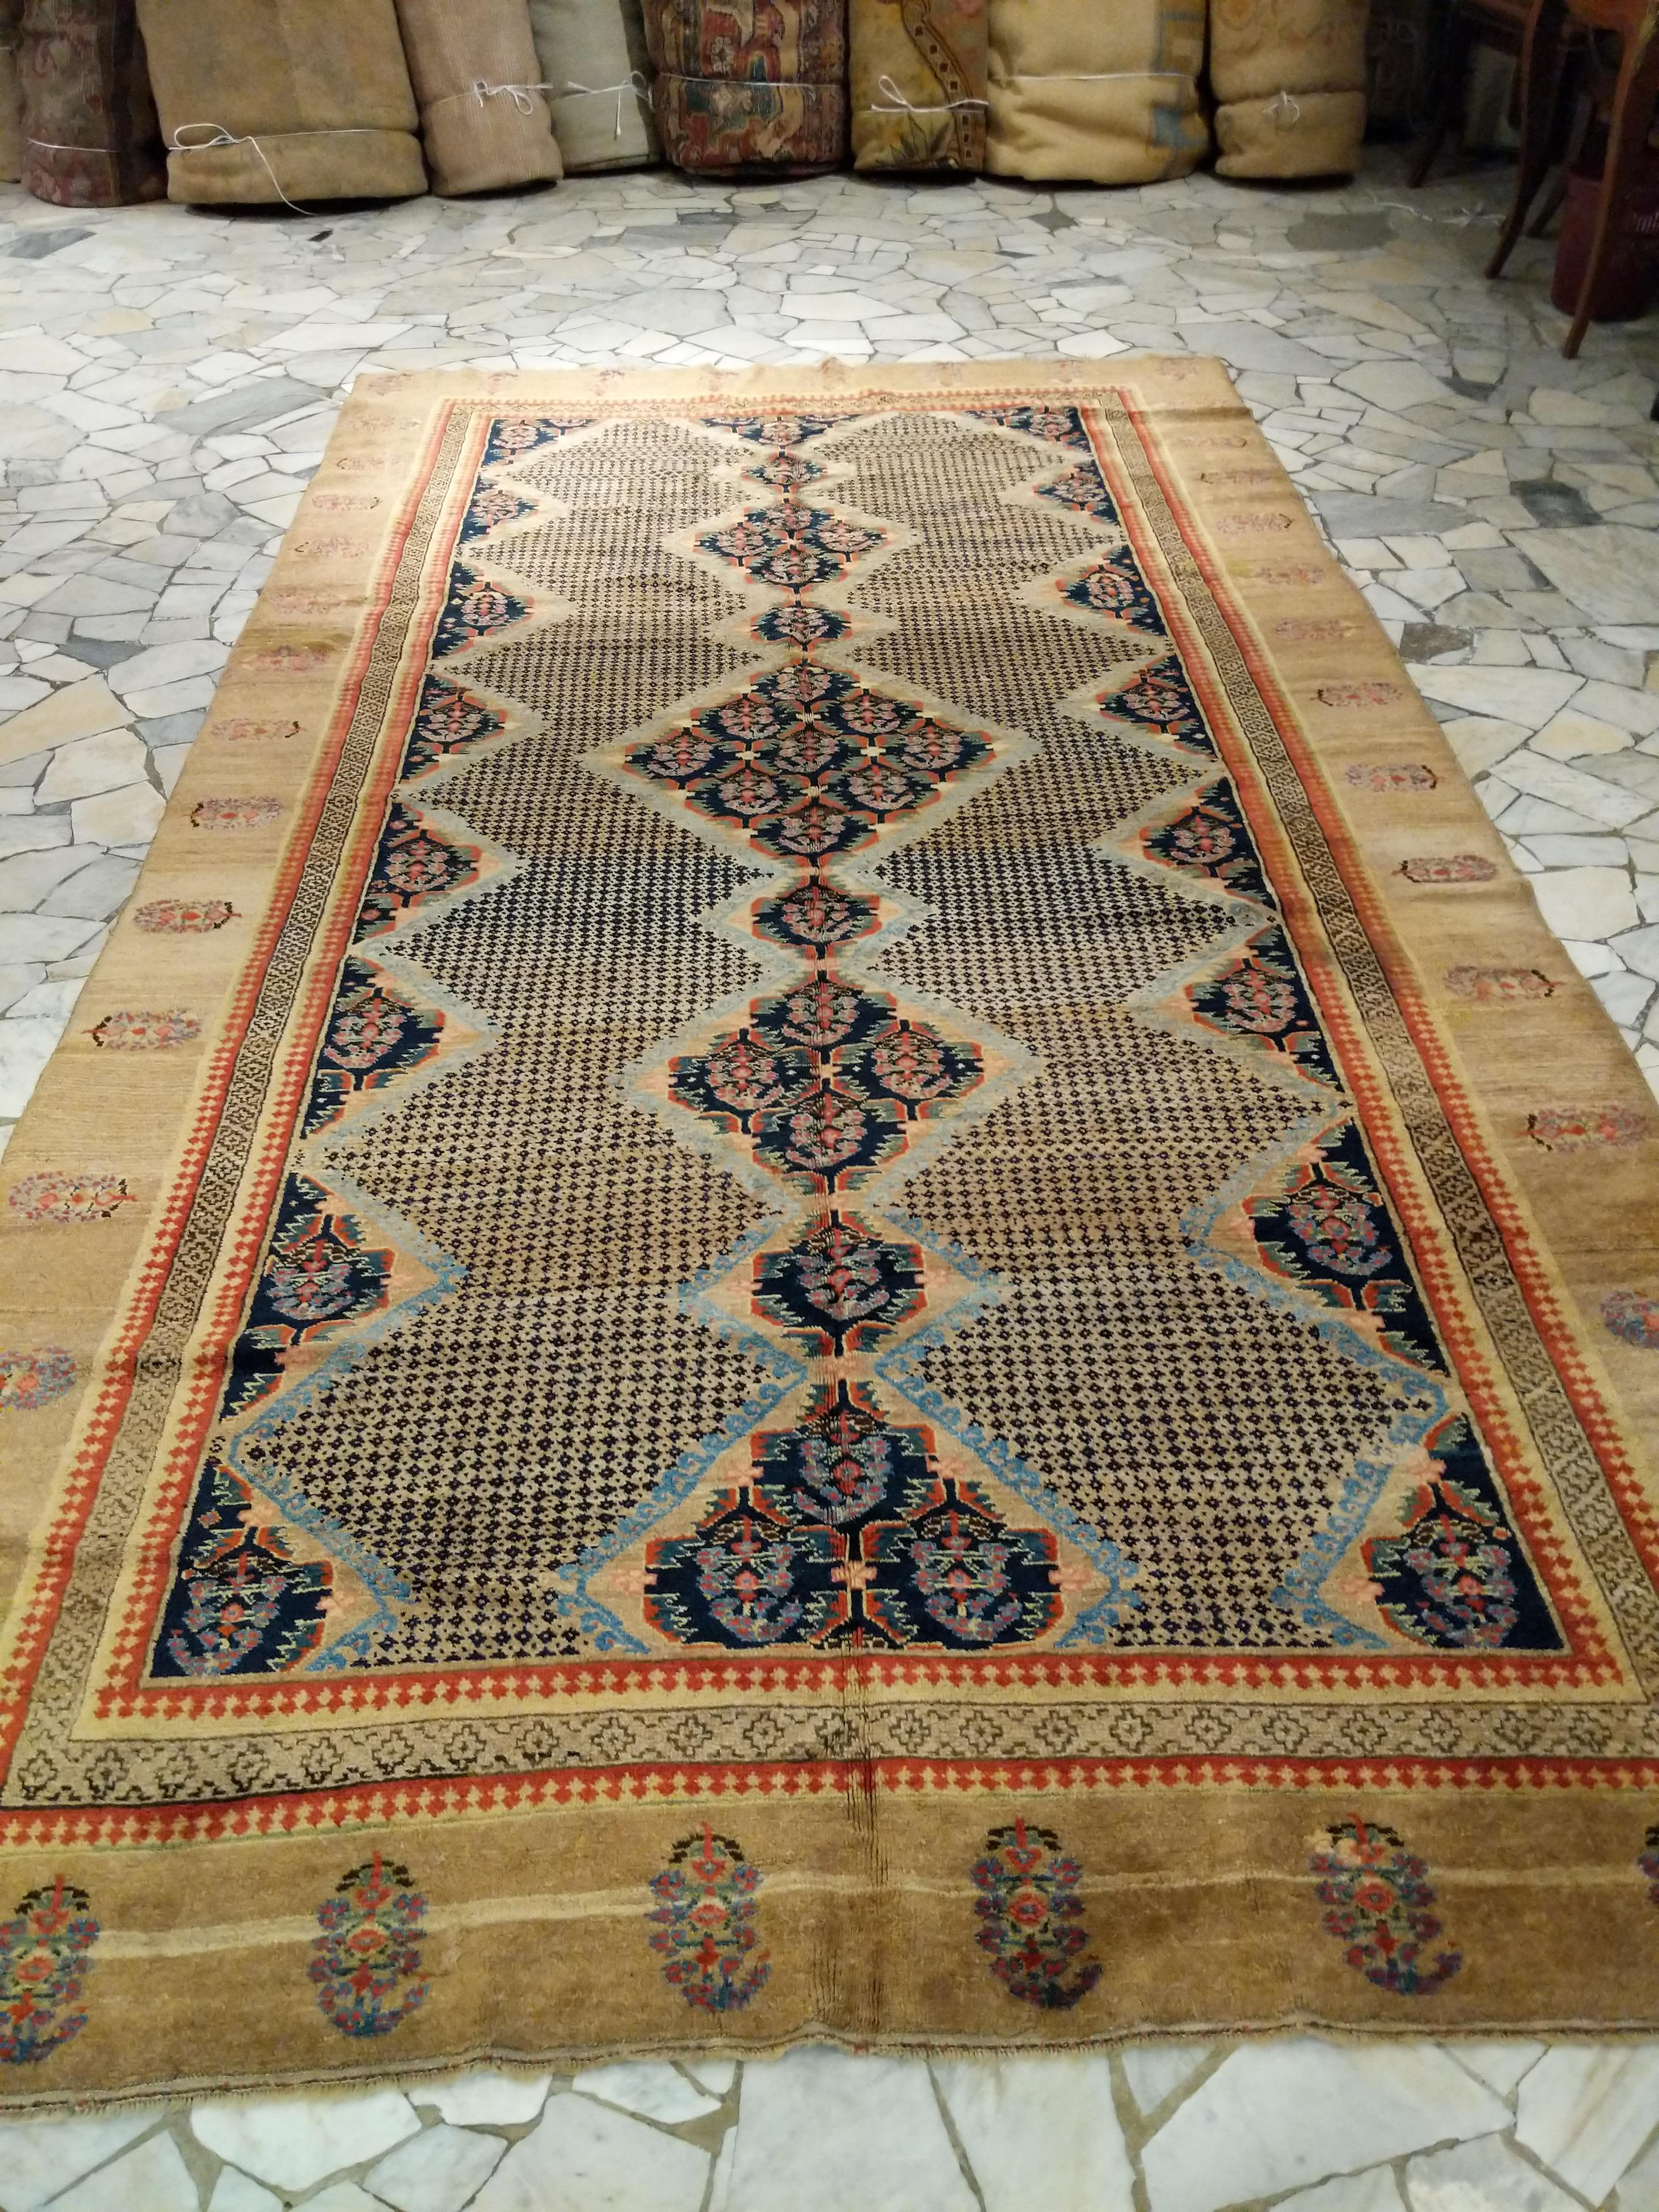 Carpets originating from the Azerbaijani town of Sarab are quite rare. They are characterised by an elongated format and a camel background, which is decorated with geometric motifs. Earlier pieces like the one illustrated here are distinguished by